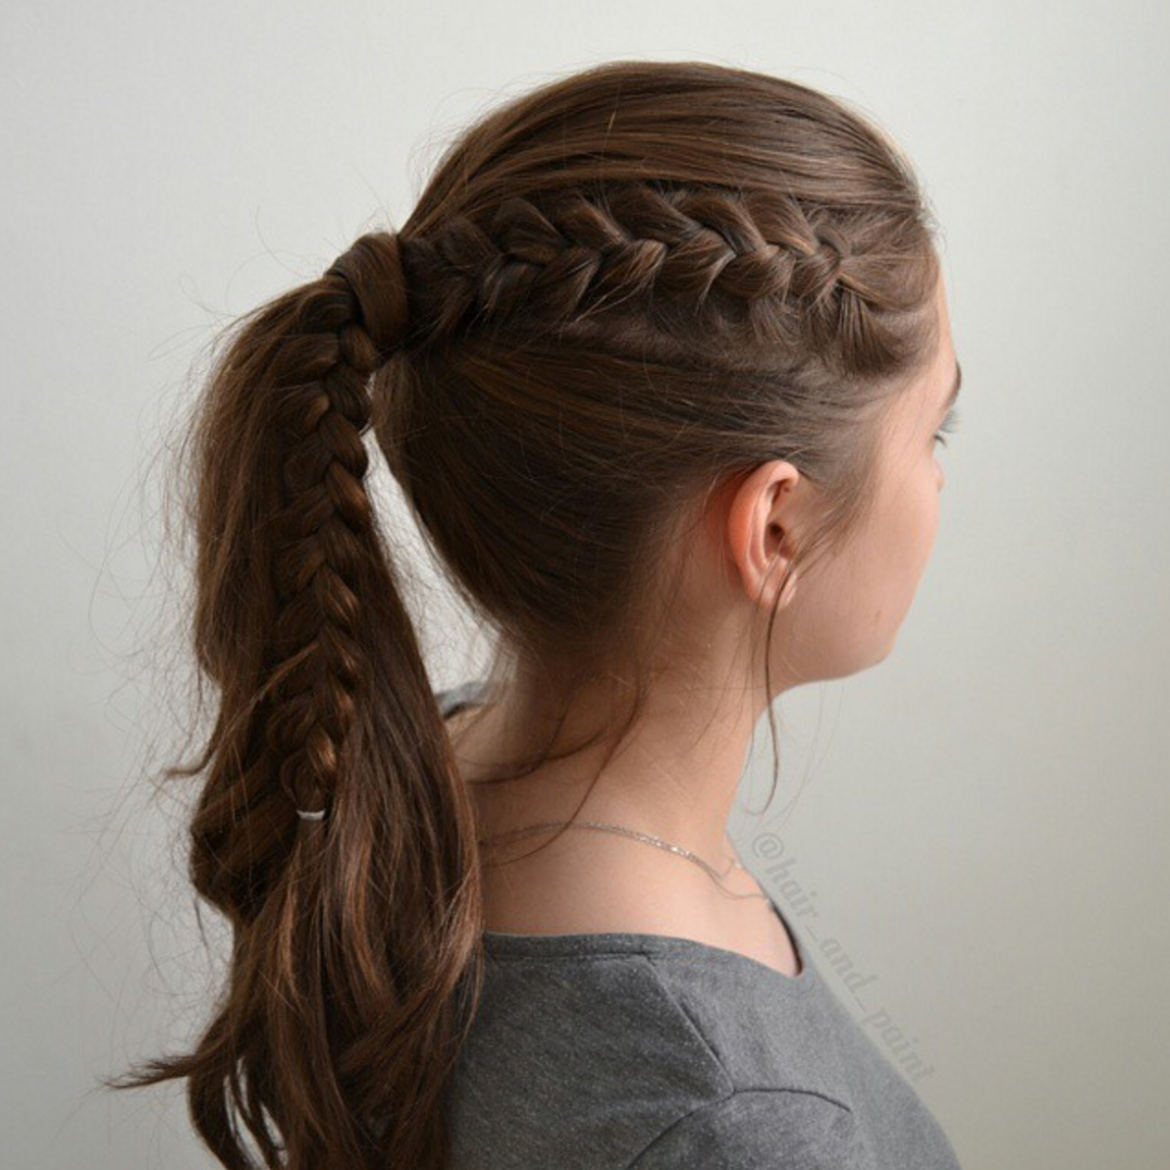 12 Pretty Easy School Hairstyles For Girls The Organised Housewife